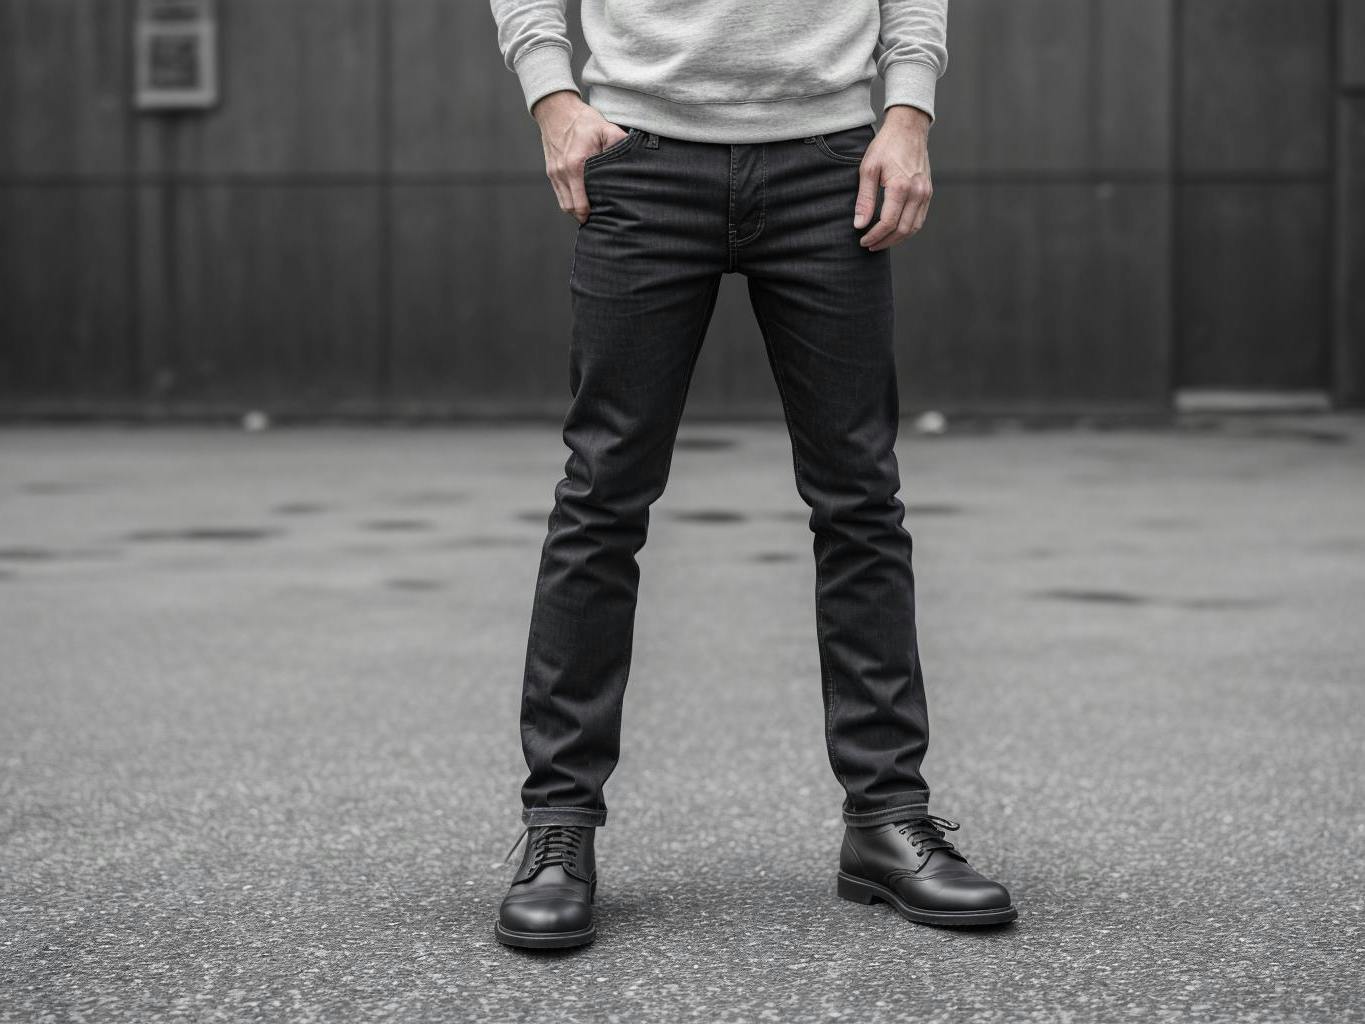 The lower half of a man wearing black jeans and black boots